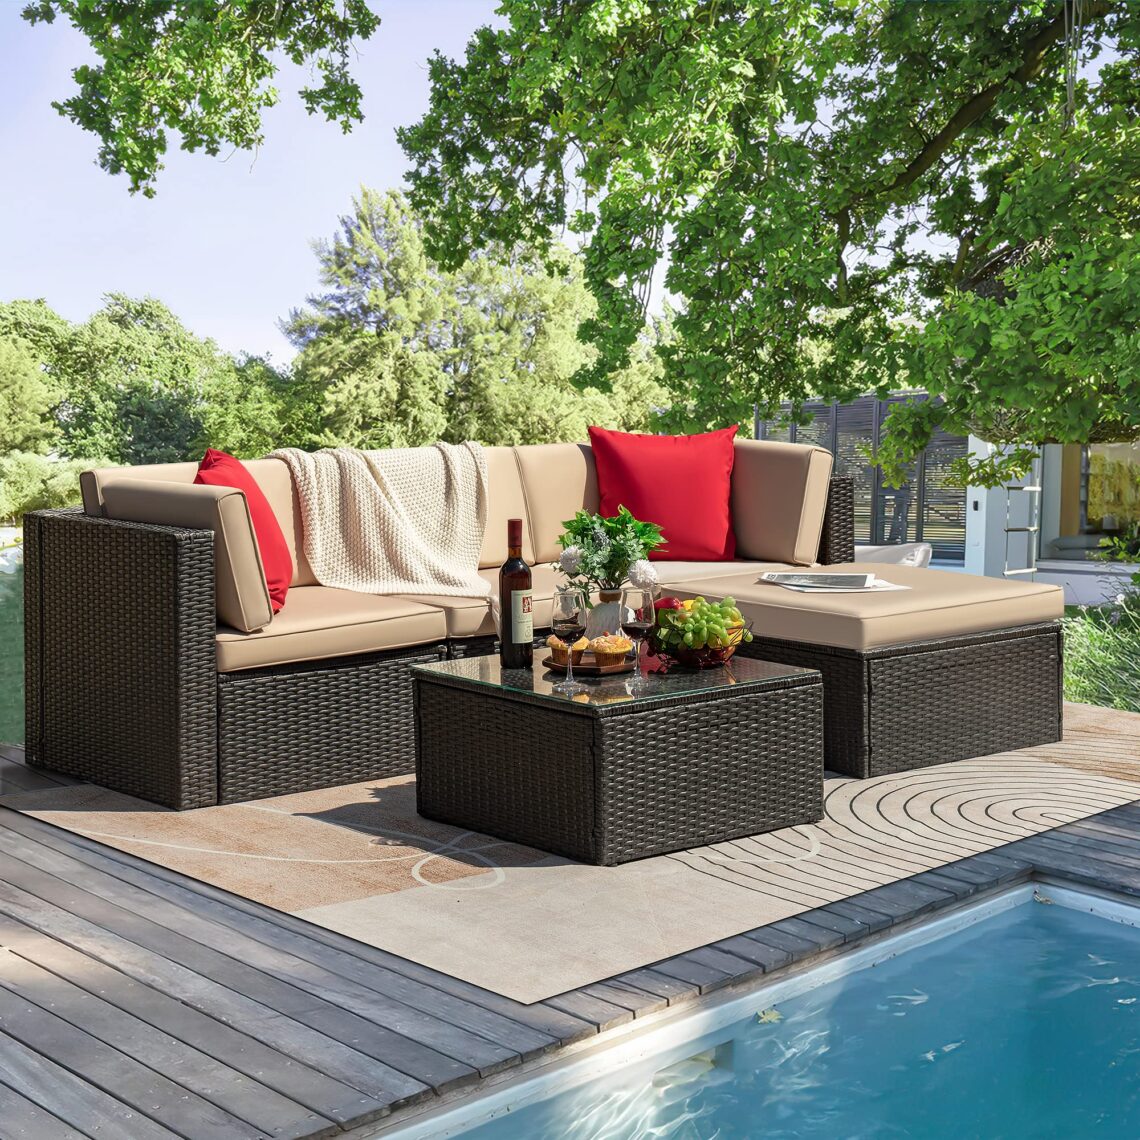 Revamp Your Backyard: 10 Outdoor Furniture Ideas for Summer 5